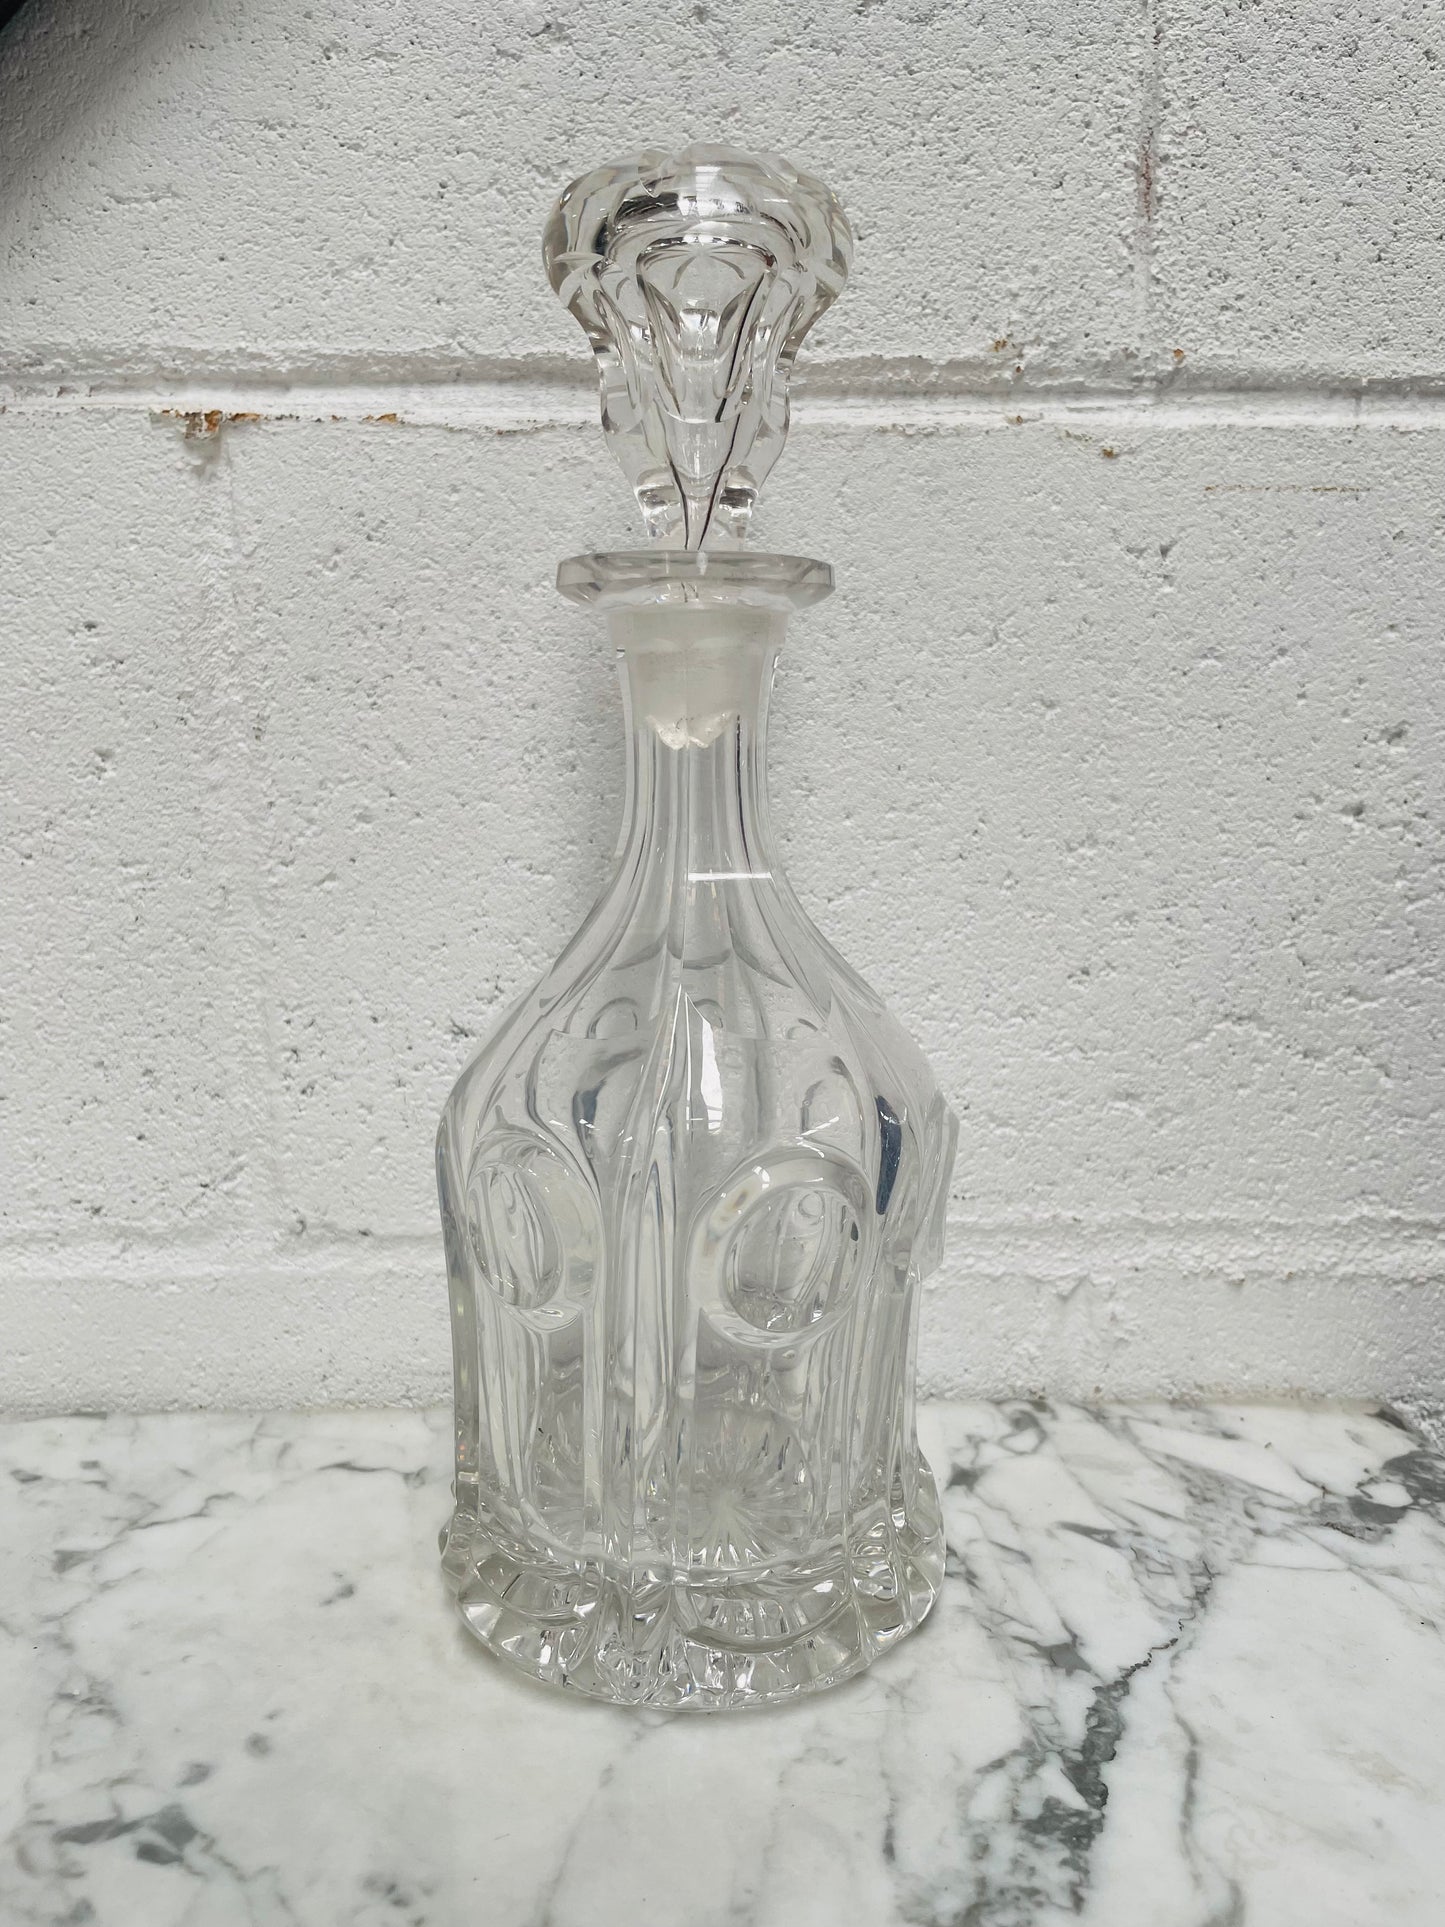 Georgian Decanter and Stopper